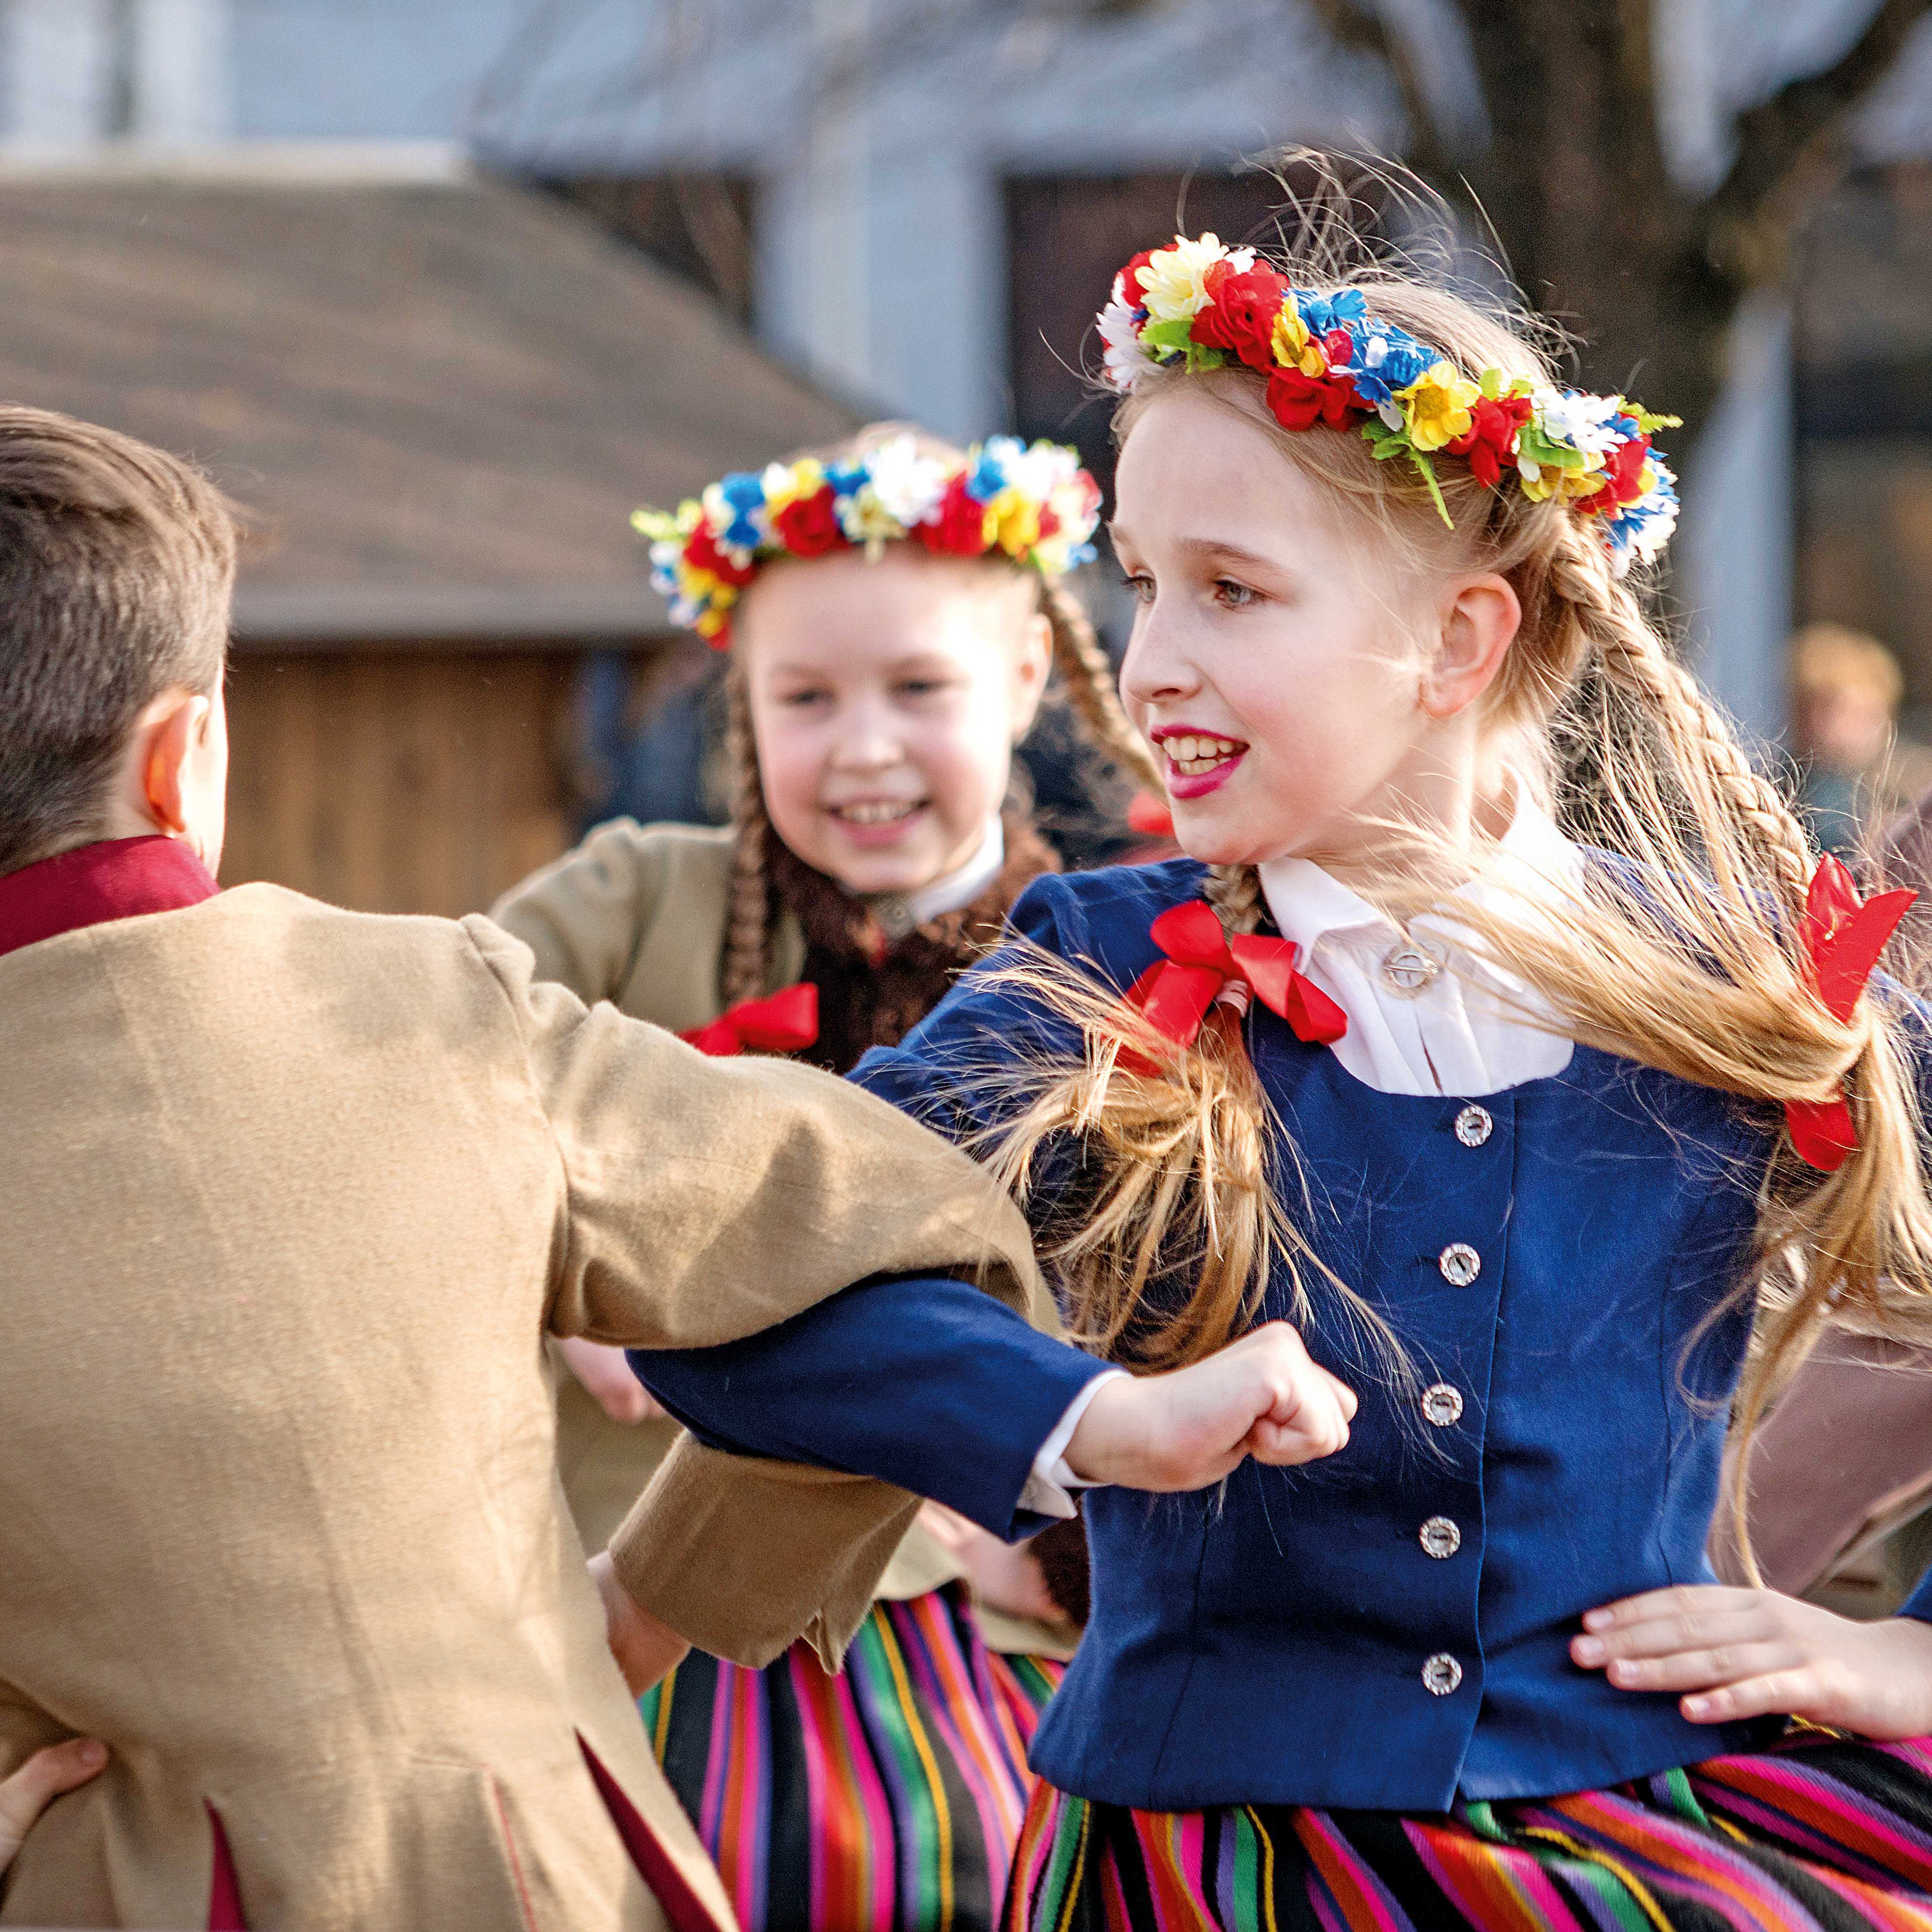 Get to know folk traditions